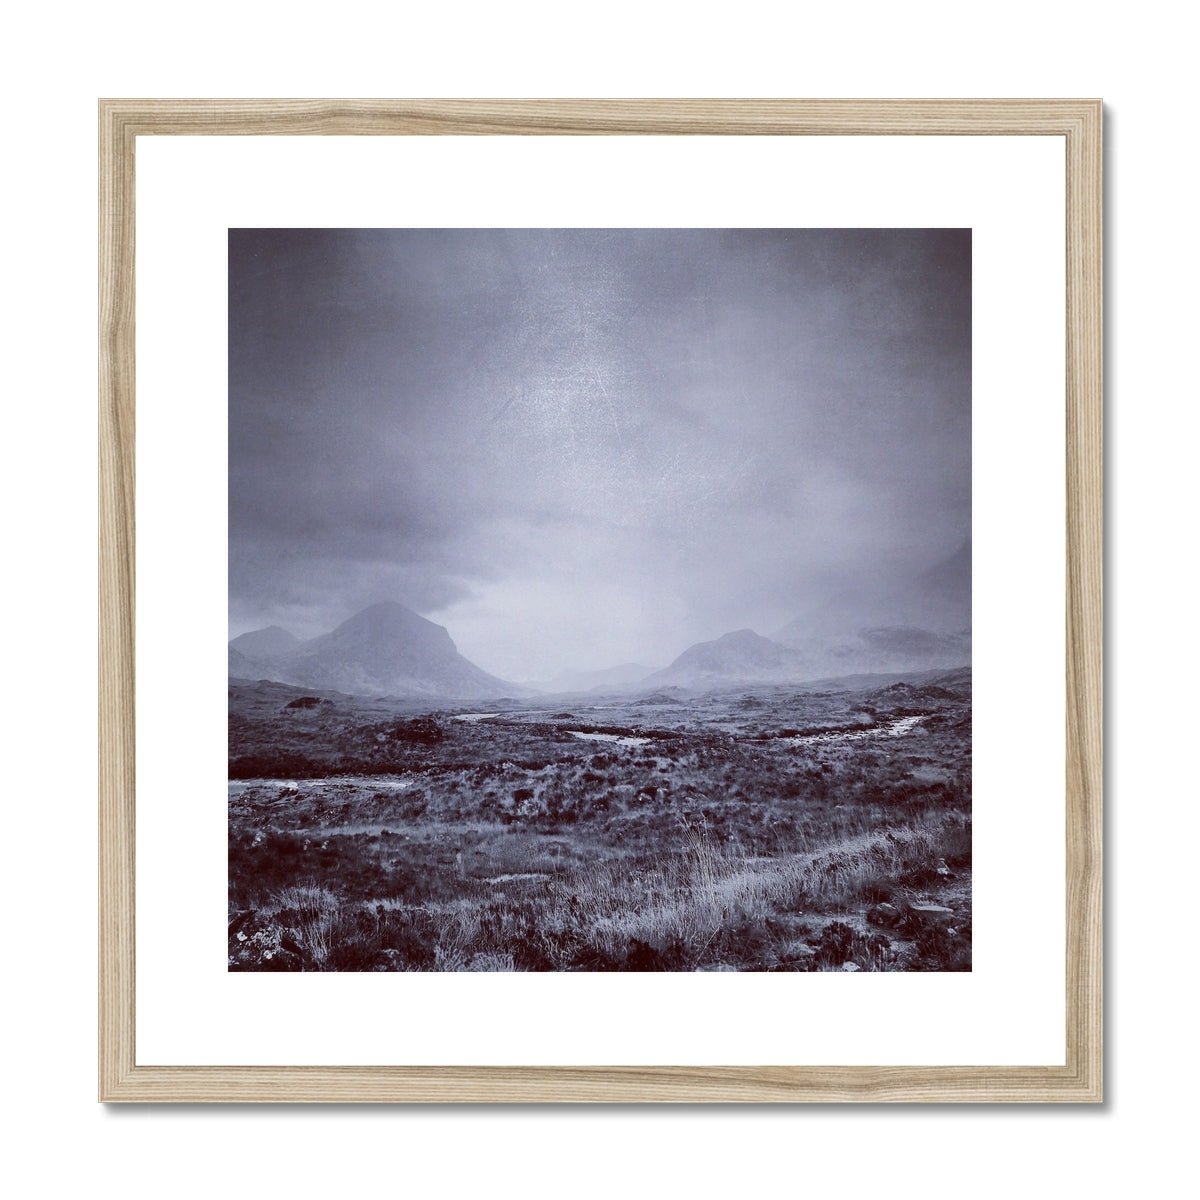 The Brooding Cuillin Skye Painting | Framed & Mounted Prints From Scotland-Framed & Mounted Prints-Skye Art Gallery-20"x20"-Natural Frame-Paintings, Prints, Homeware, Art Gifts From Scotland By Scottish Artist Kevin Hunter